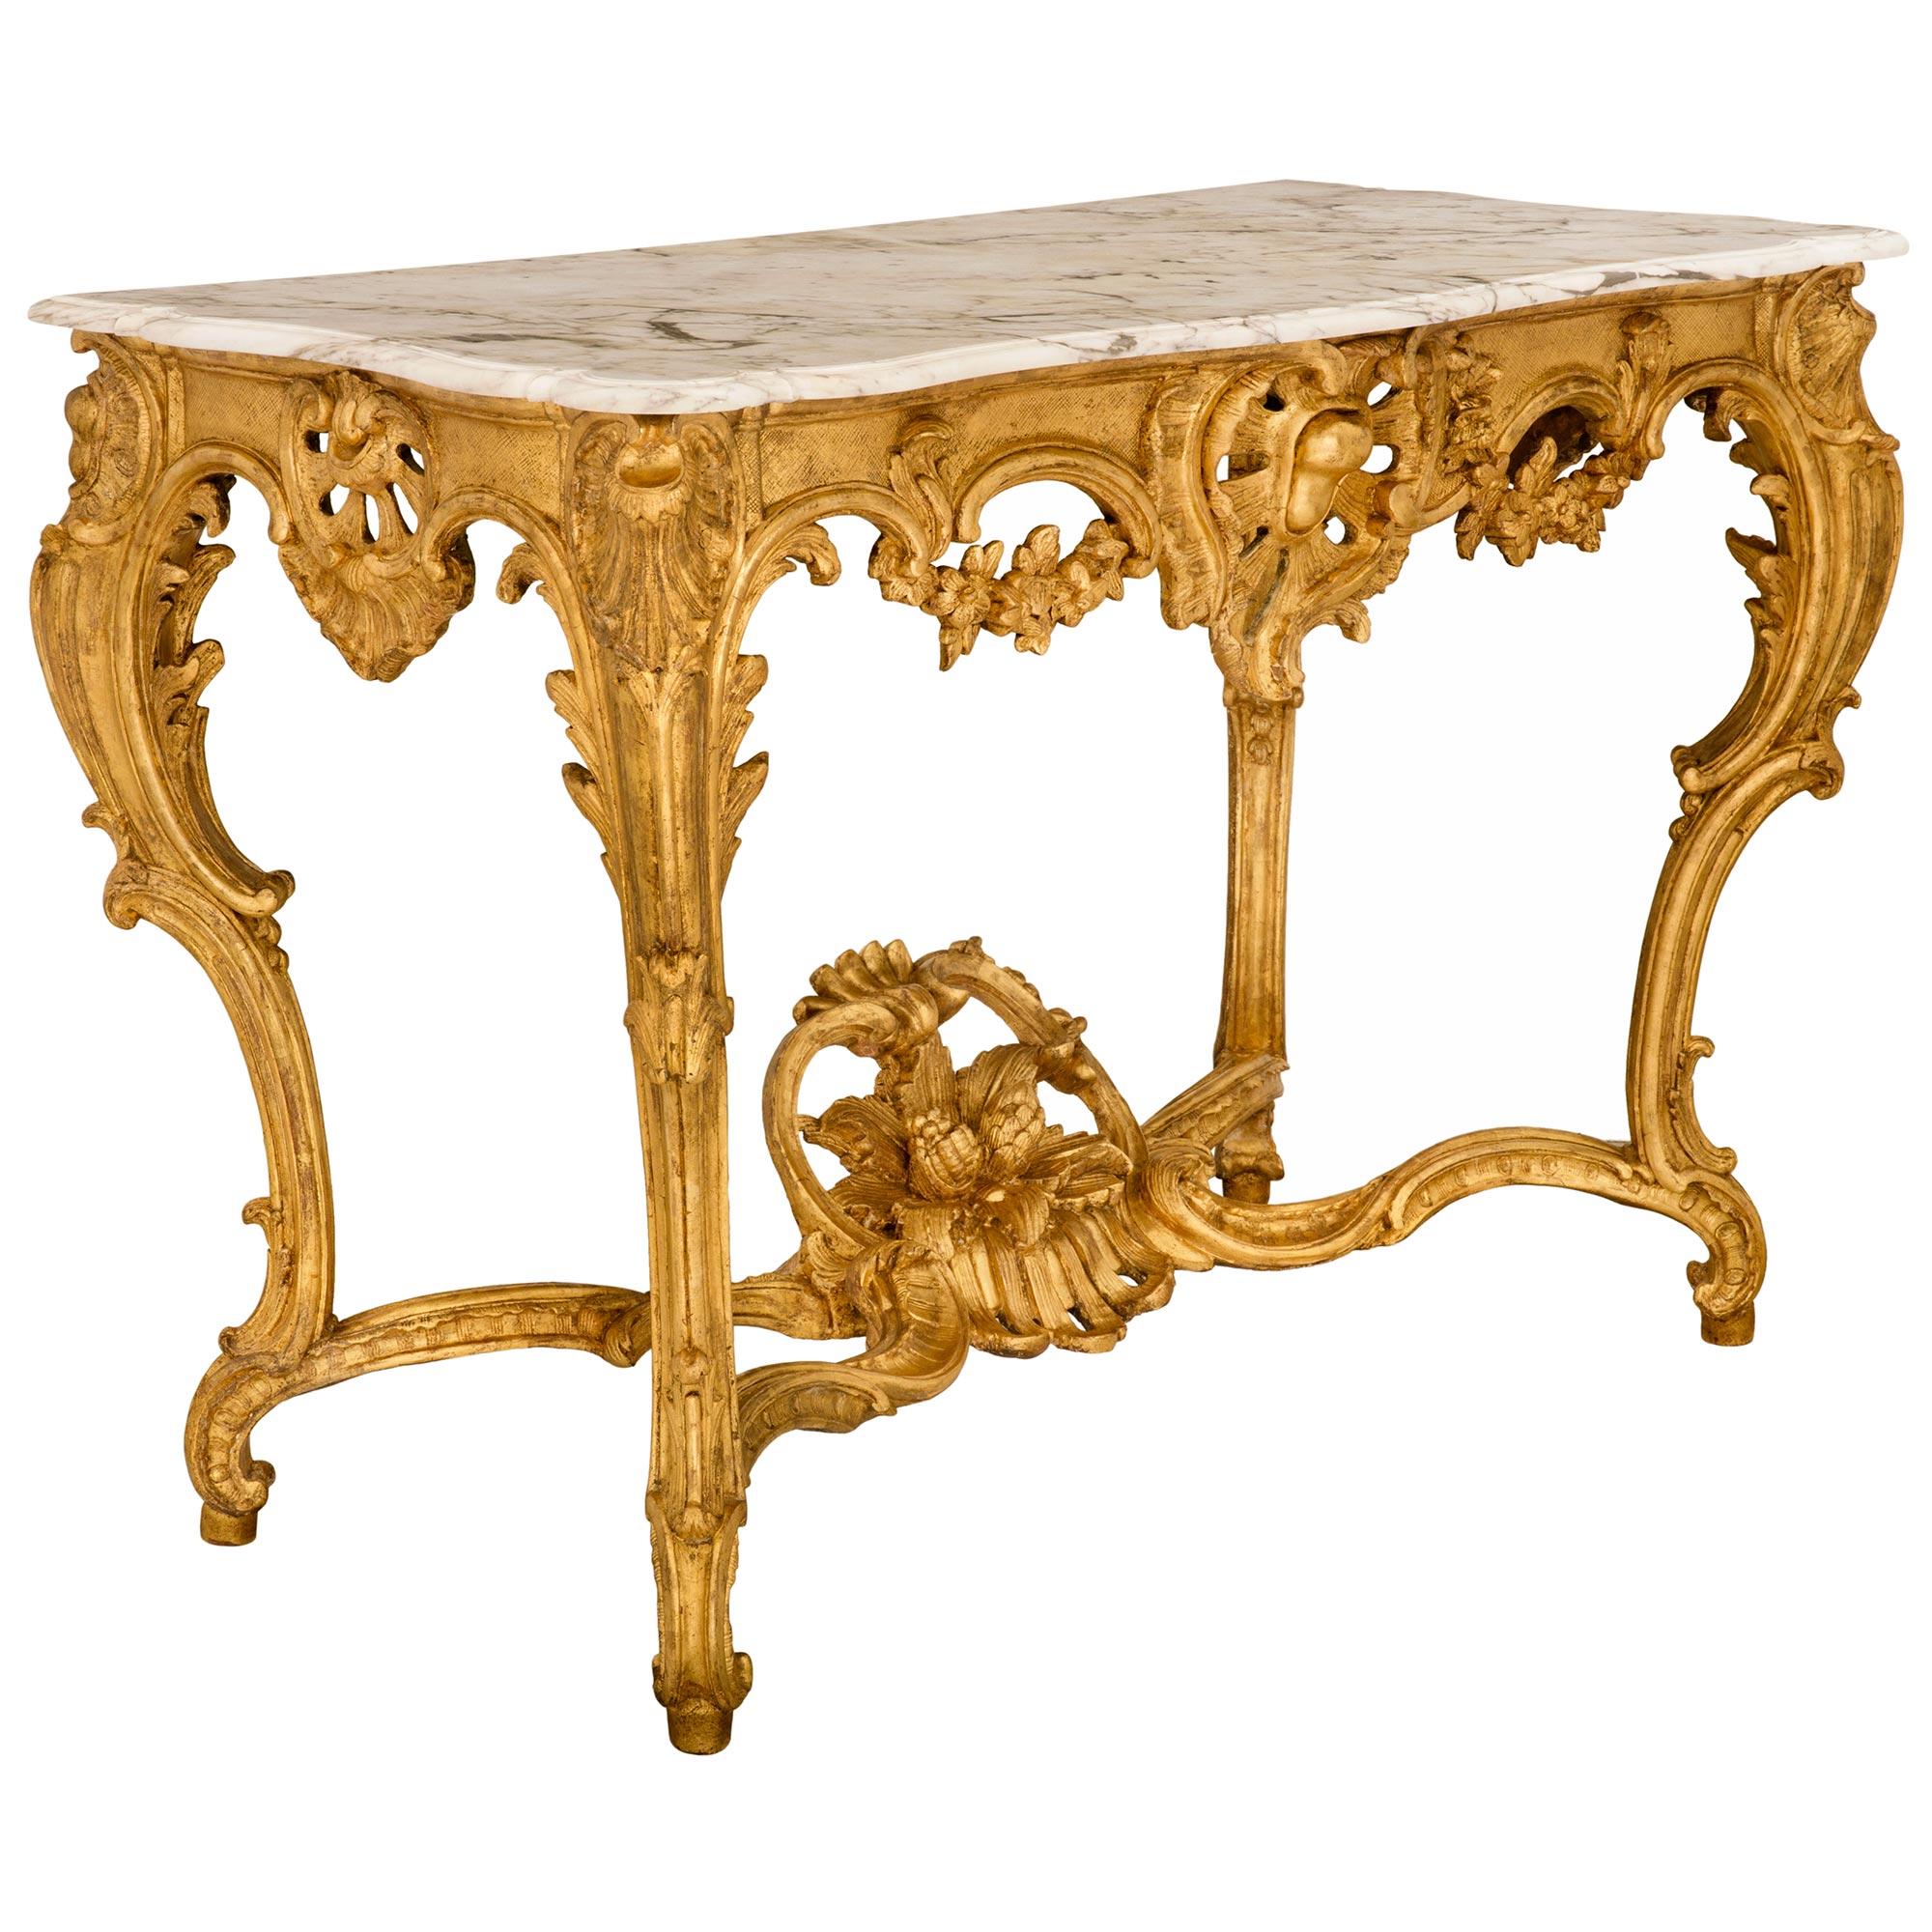 Italian 18th Century Regence Style Louis XV Period Giltwood and Marble Console In Good Condition For Sale In West Palm Beach, FL